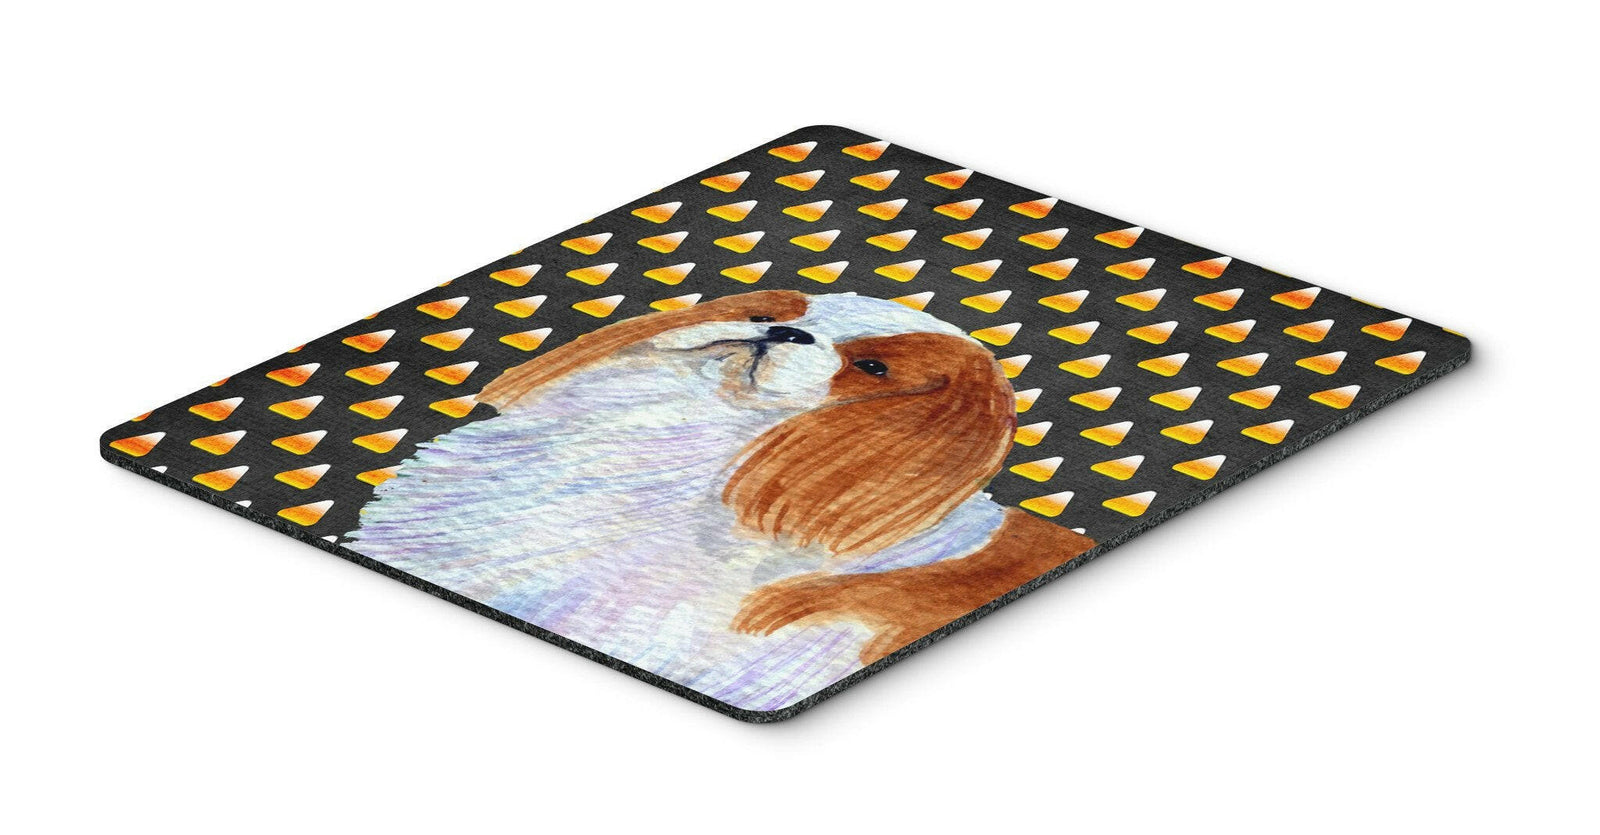 English Toy Spaniel Candy Corn Halloween Portrait Mouse Pad, Hot Pad or Trivet by Caroline's Treasures